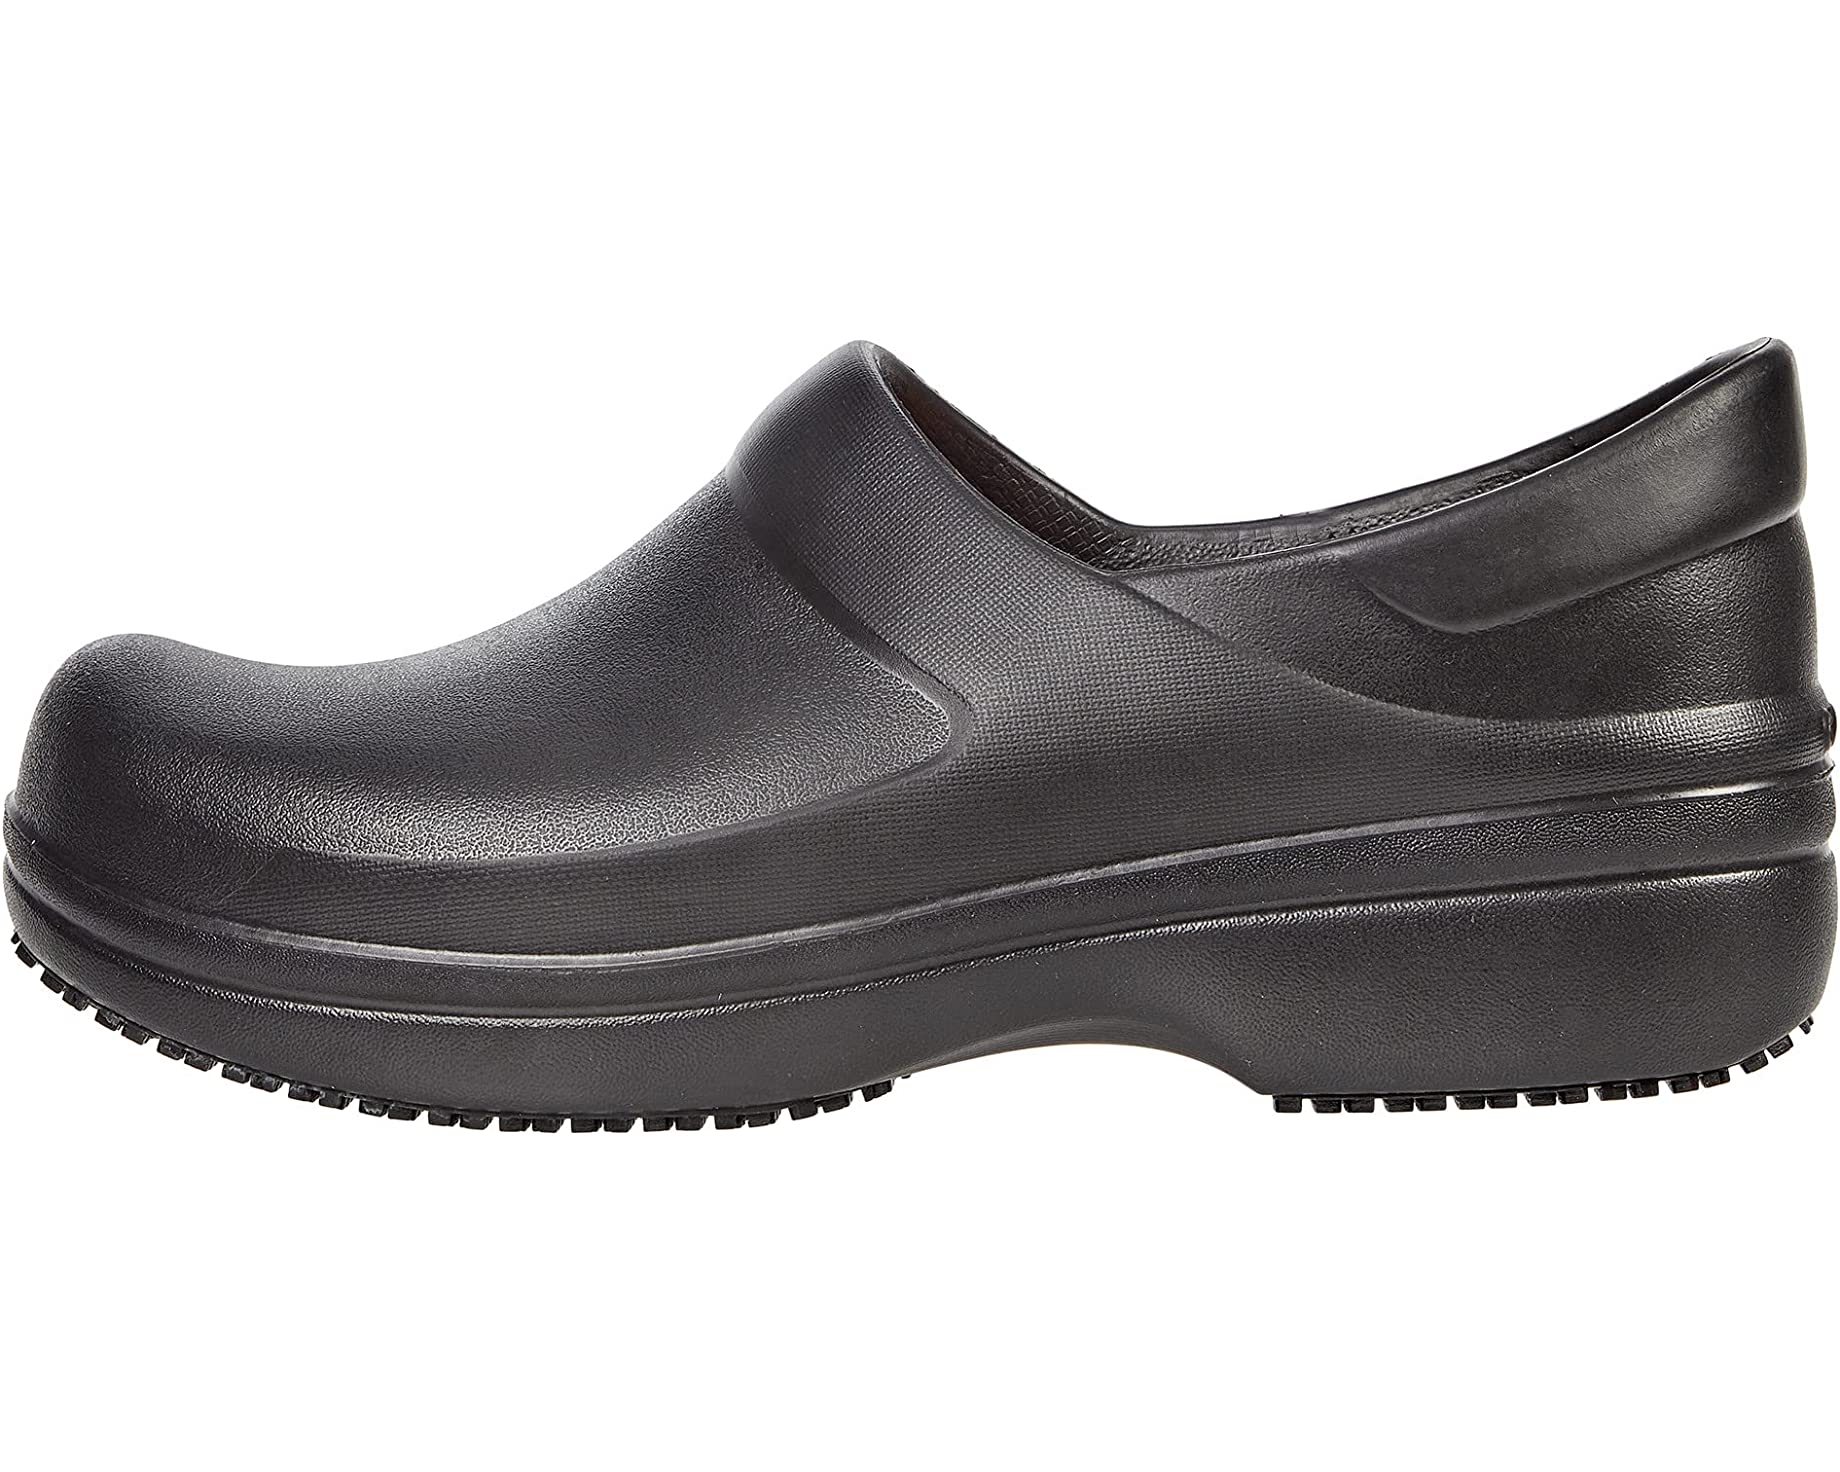  Hey Collection Men's and Women's Slip Resistant Work Clog |  Nurse and Chef Shoes | Shoes